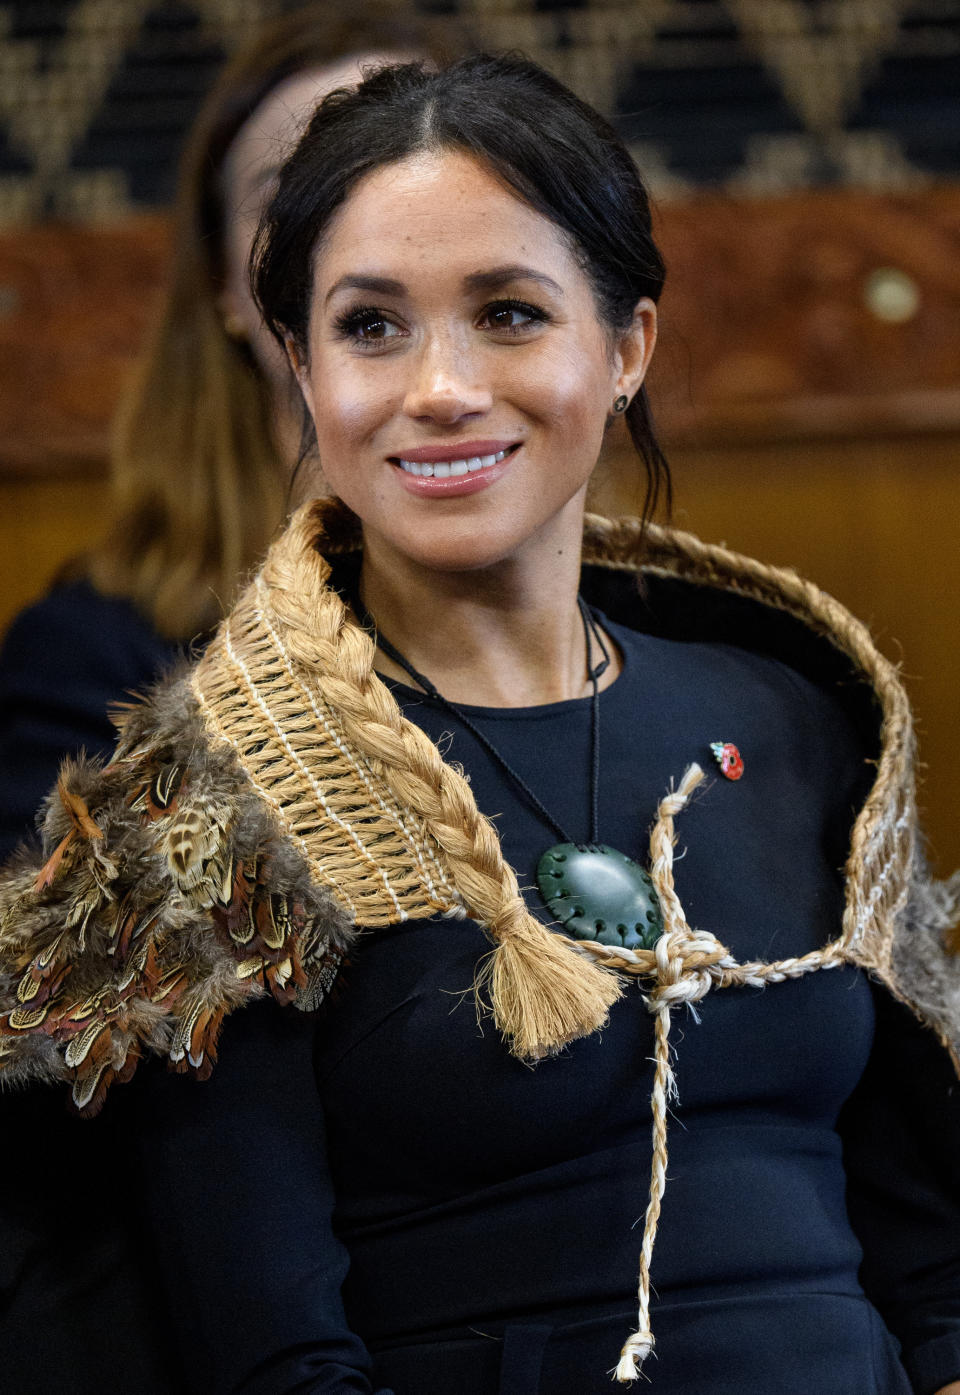 ROTORUA, NEW ZEALAND - OCTOBER 31:  Meghan, Duchess of Sussex  visits Te Papaiouru Marae for a formal powhiri and luncheon on October 31, 2018 in Rotorua, New Zealand. The Duke and Duchess of Sussex are on their official 16-day Autumn tour visiting cities in Australia, Fiji, Tonga and New Zealand.  (Photo by Pool/Samir Hussein/WireImage)